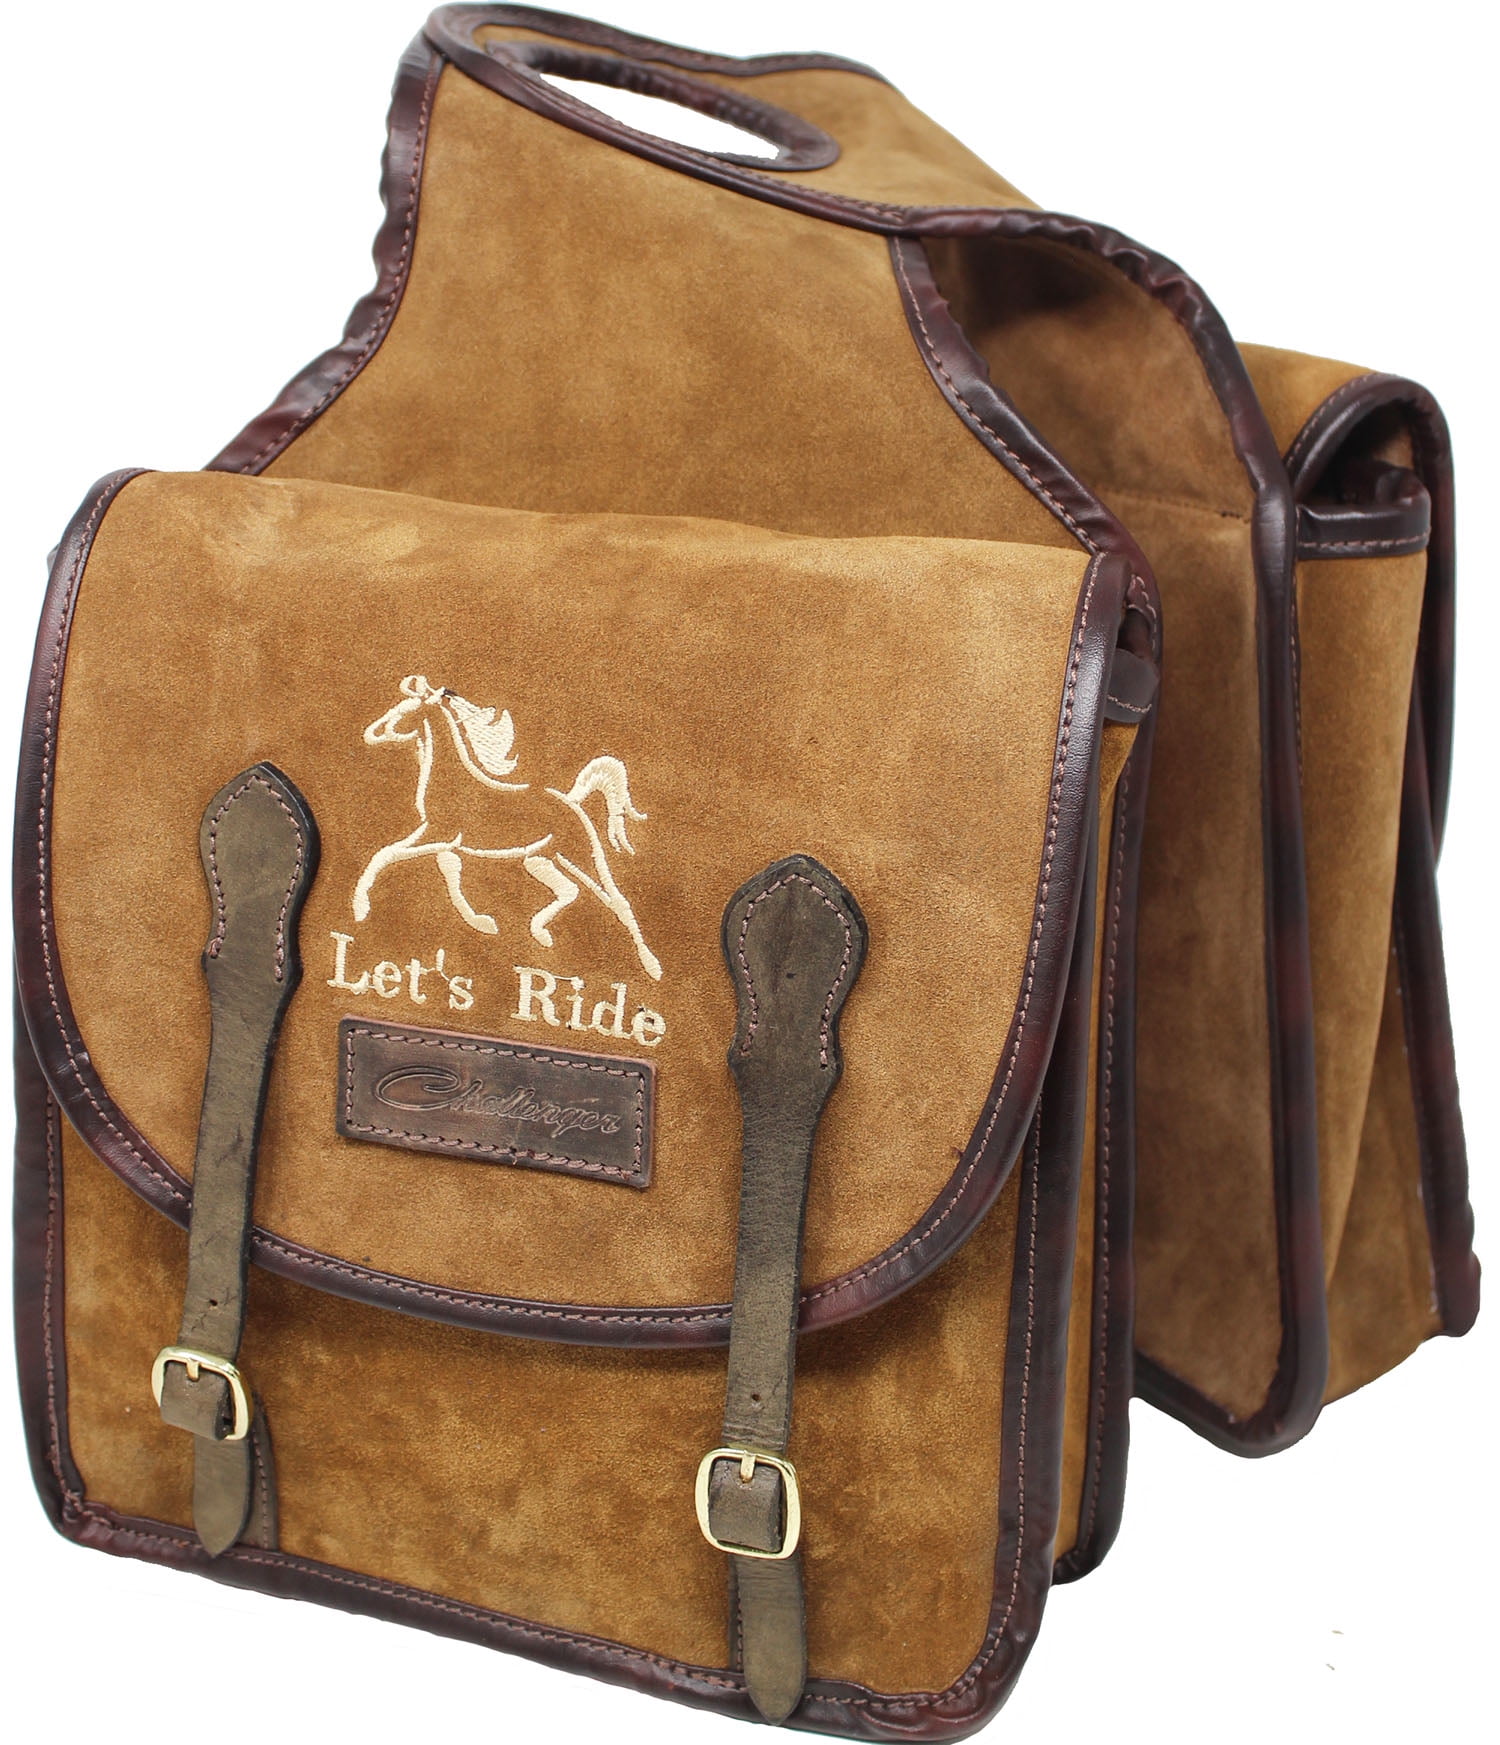 Tough-1 Soft Leather Saddle Bag Two Pockets Saddle Strings/Dee Ring Attachments 